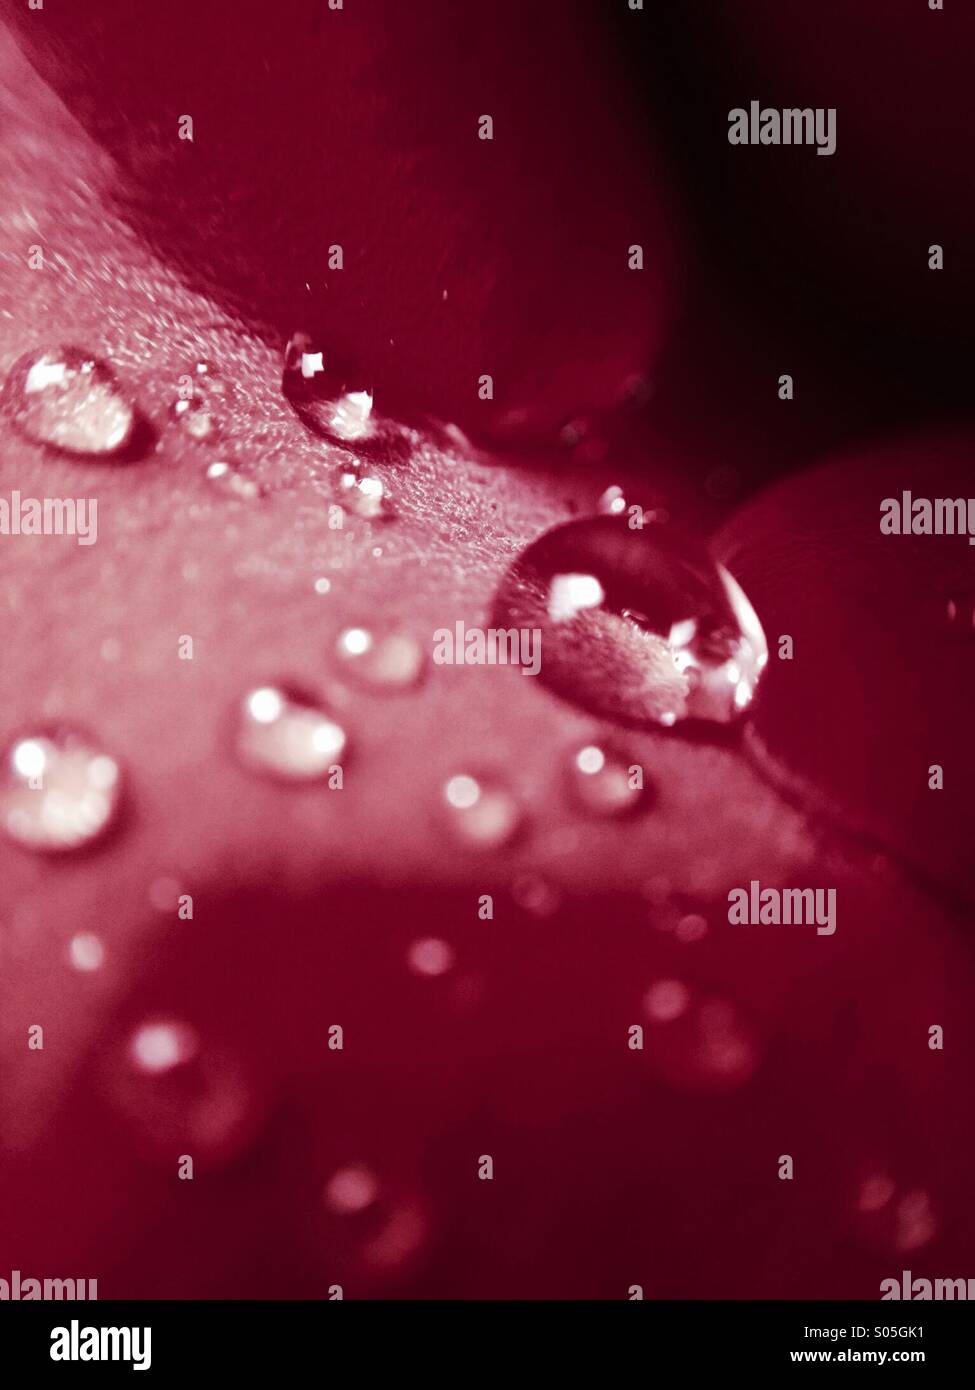 Close up of water droplets on rose petal Stock Photo